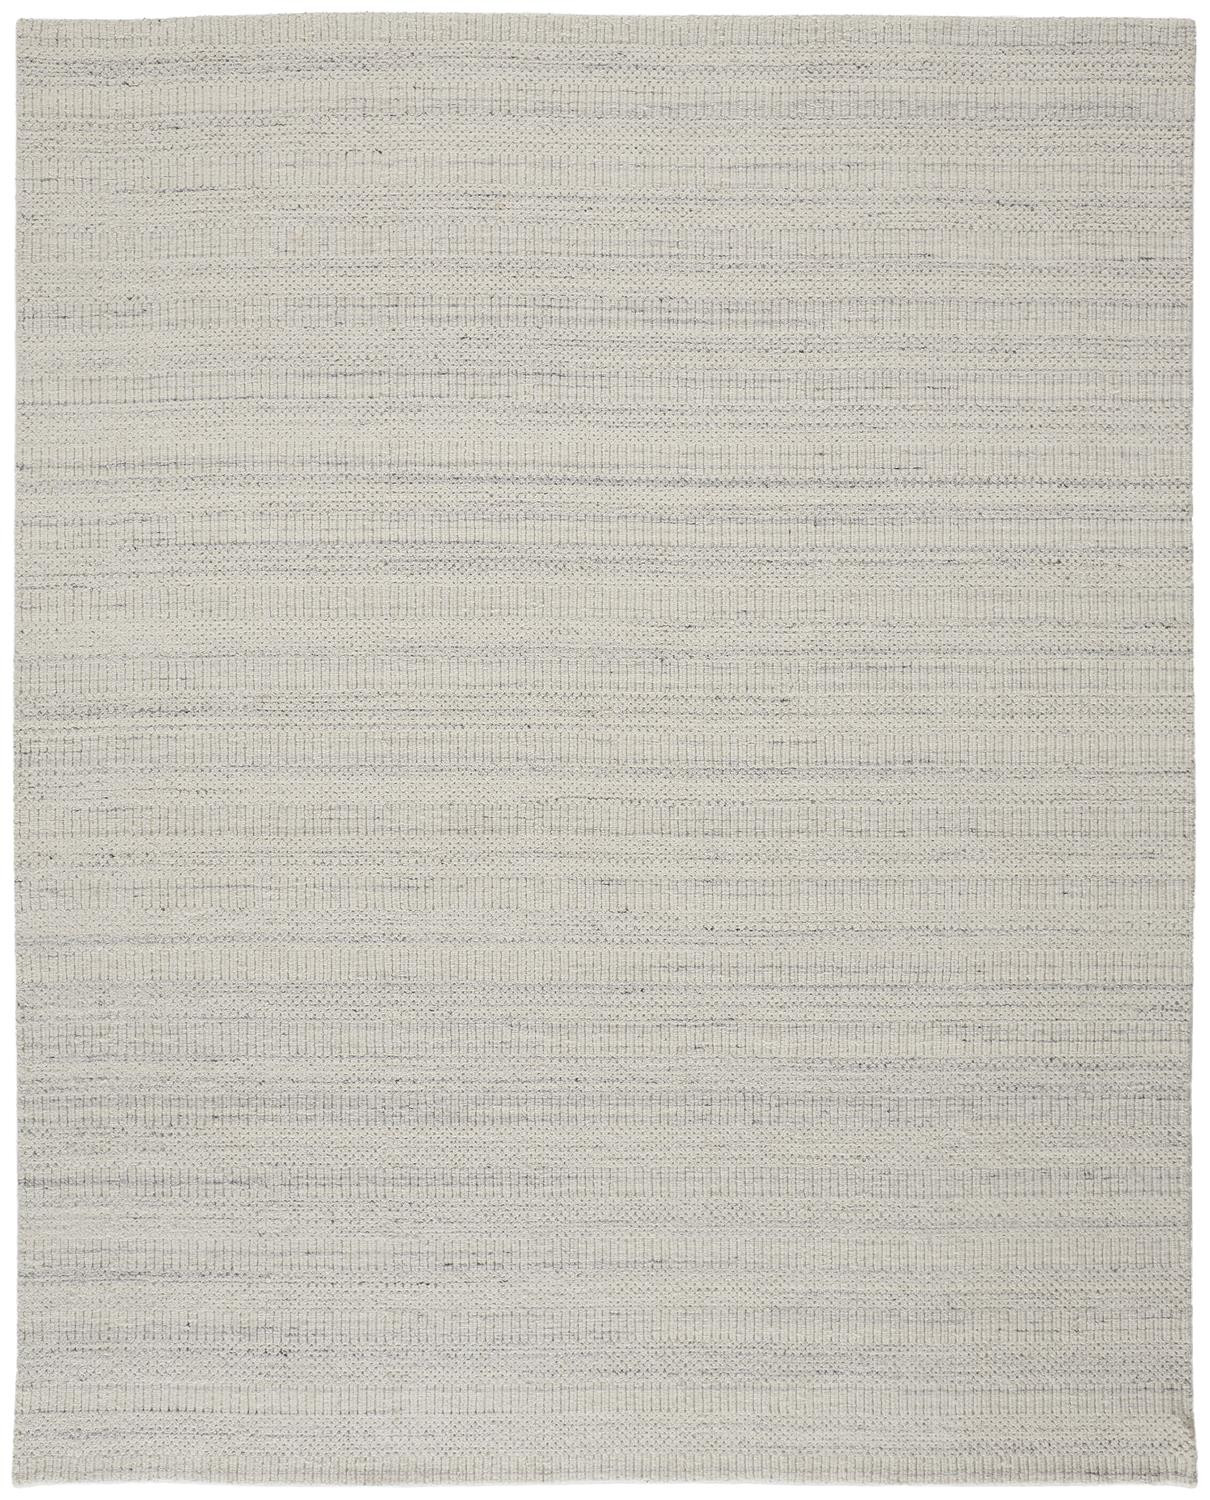 4' X 6' Ivory And Gray Wool Hand Woven Stain Resistant Area Rug-514056-1